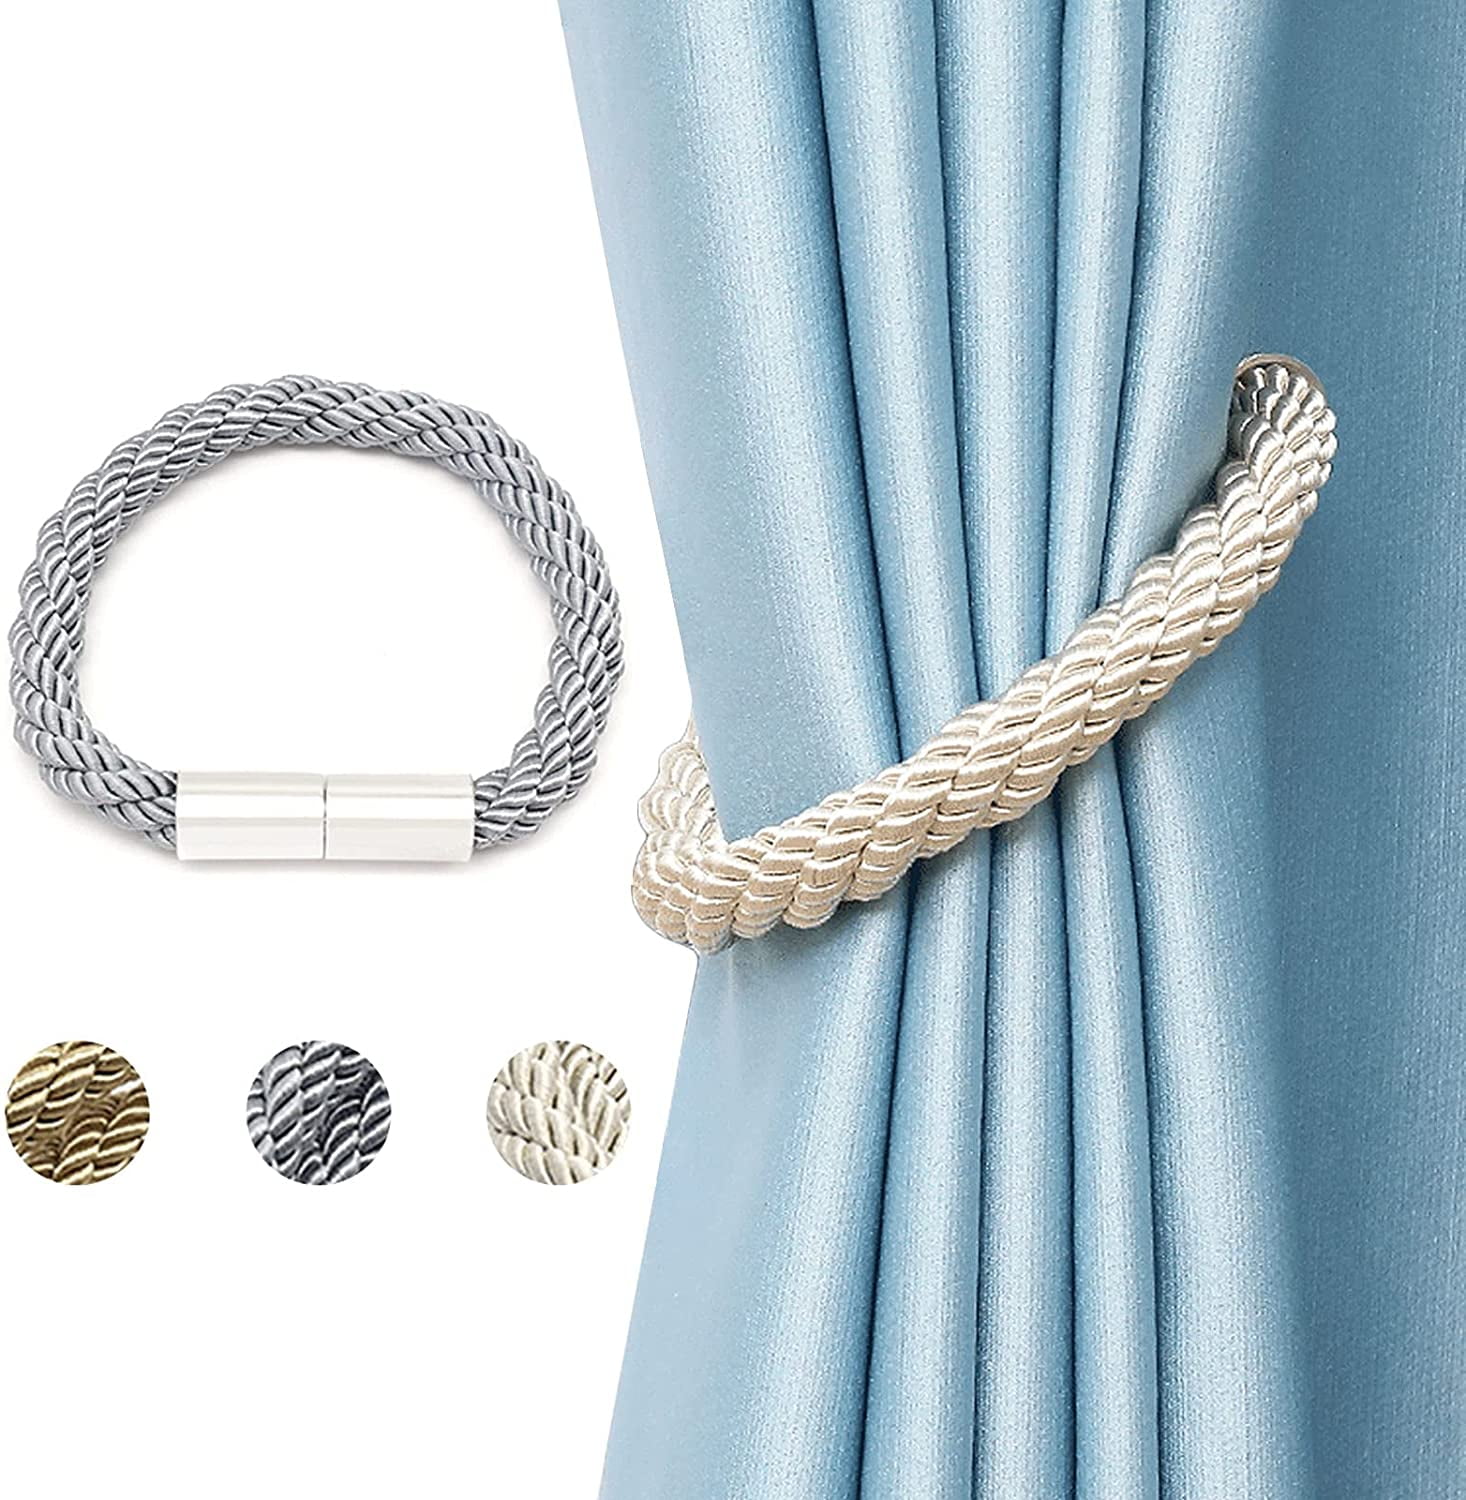 Details about   Ropes Tie Backs Accessories For Drapes Holdbacks Decorative Curtain Tassel Clips 